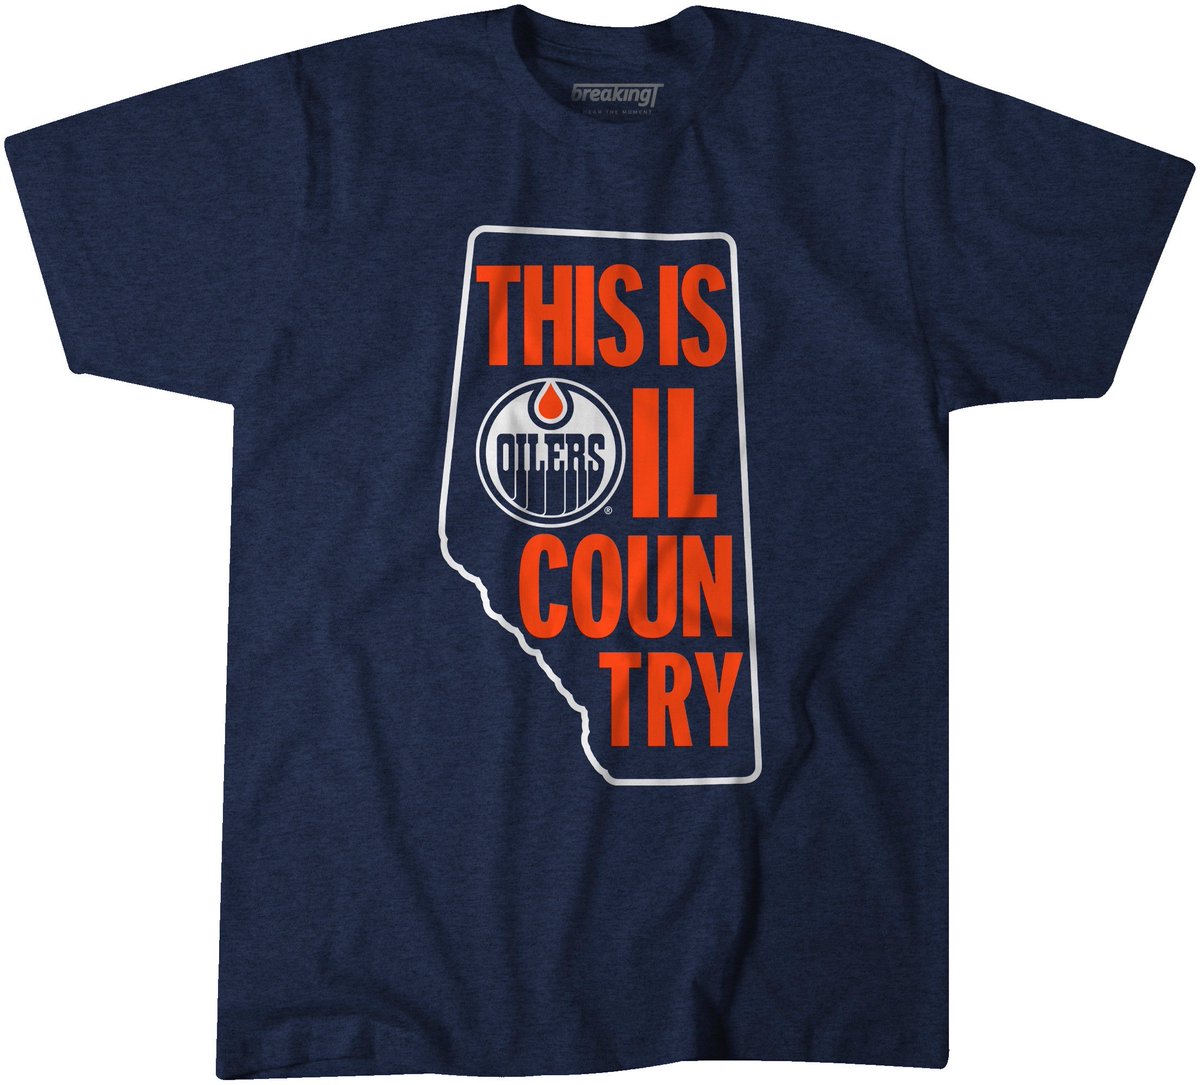 Battle of Alberta Game Day! Shop the tee: bit.ly/3MxJWlS #LetsGoOilers #ThisIsOilCountry #BOA